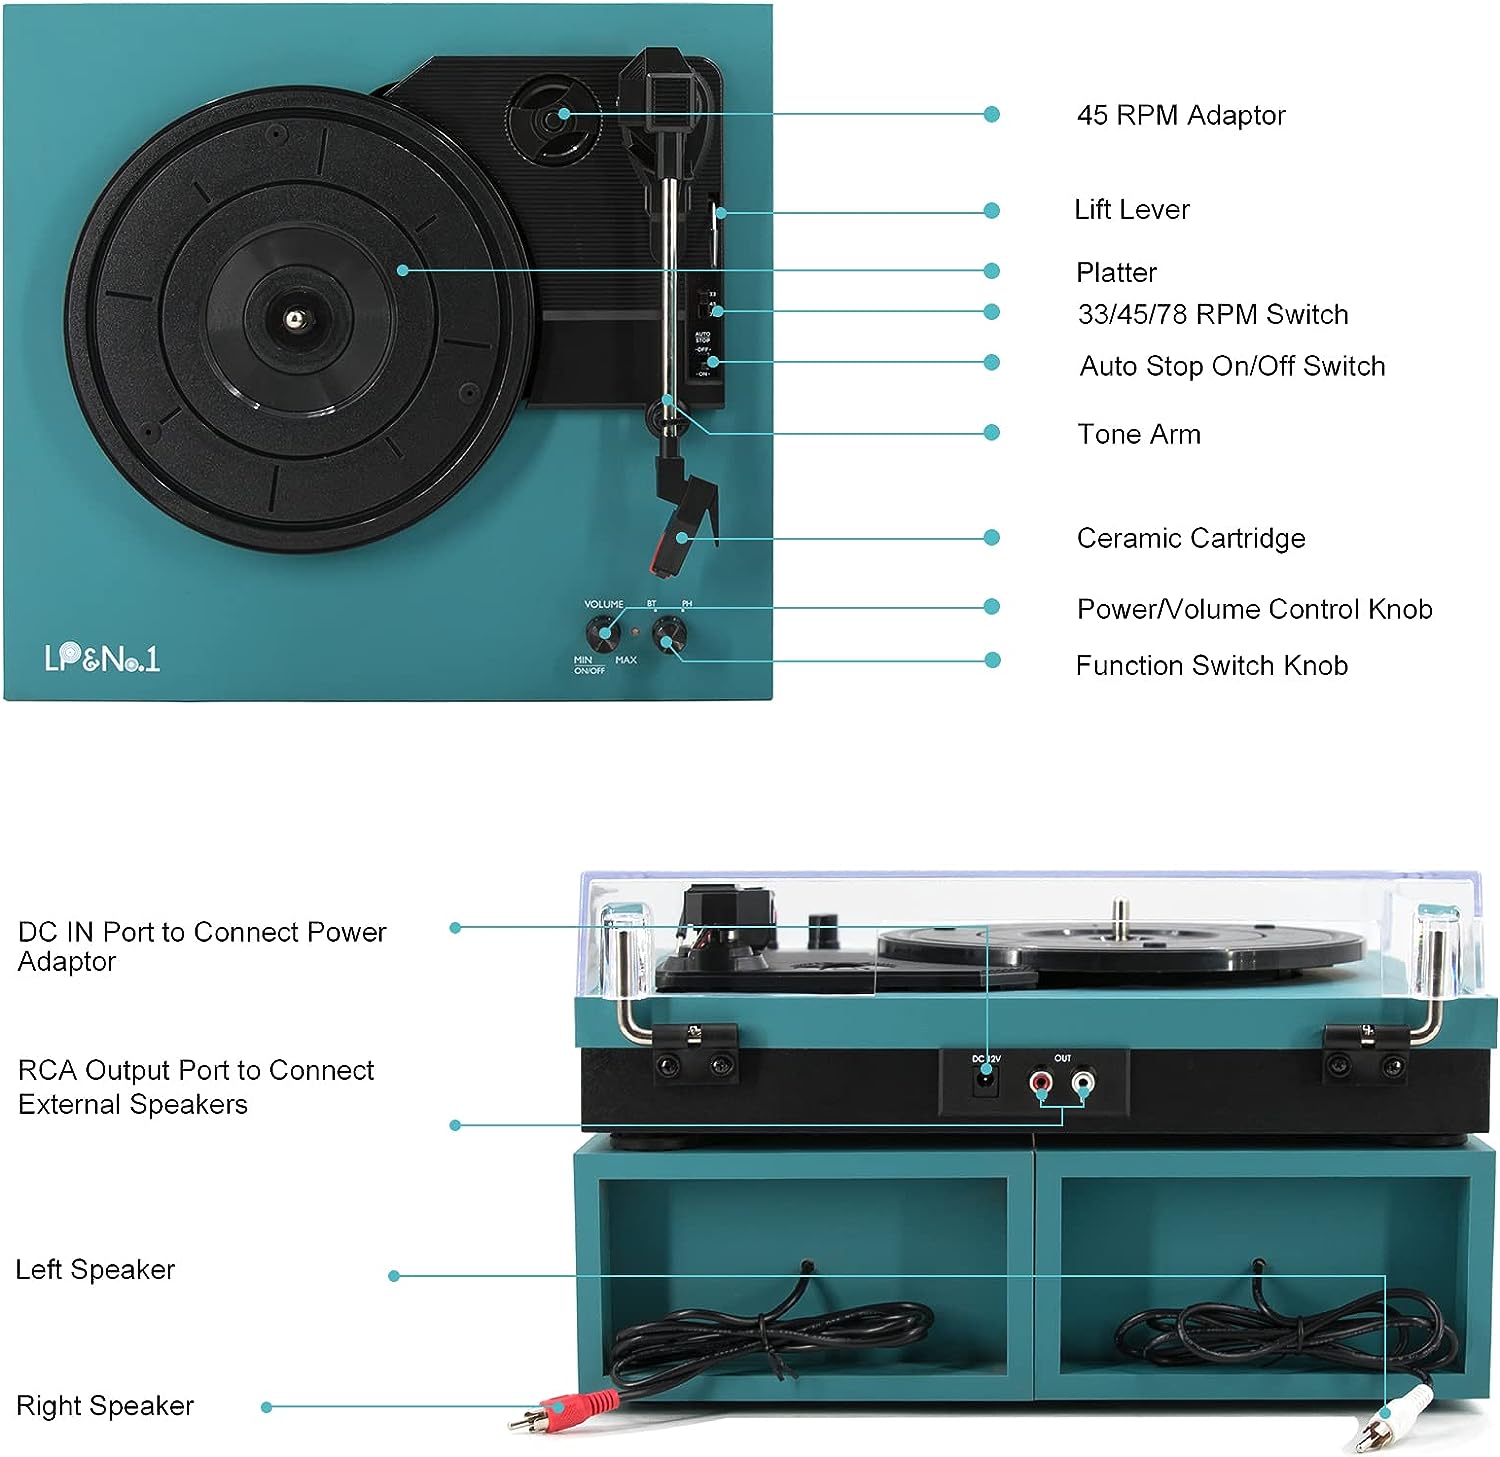 LP&No.1 Bluetooth Vinyl Record Player with External Speakers, 3-Speed Belt-Drive Turntable for Vinyl Albums with Auto Off and Bluetooth Input, Yellow Wood